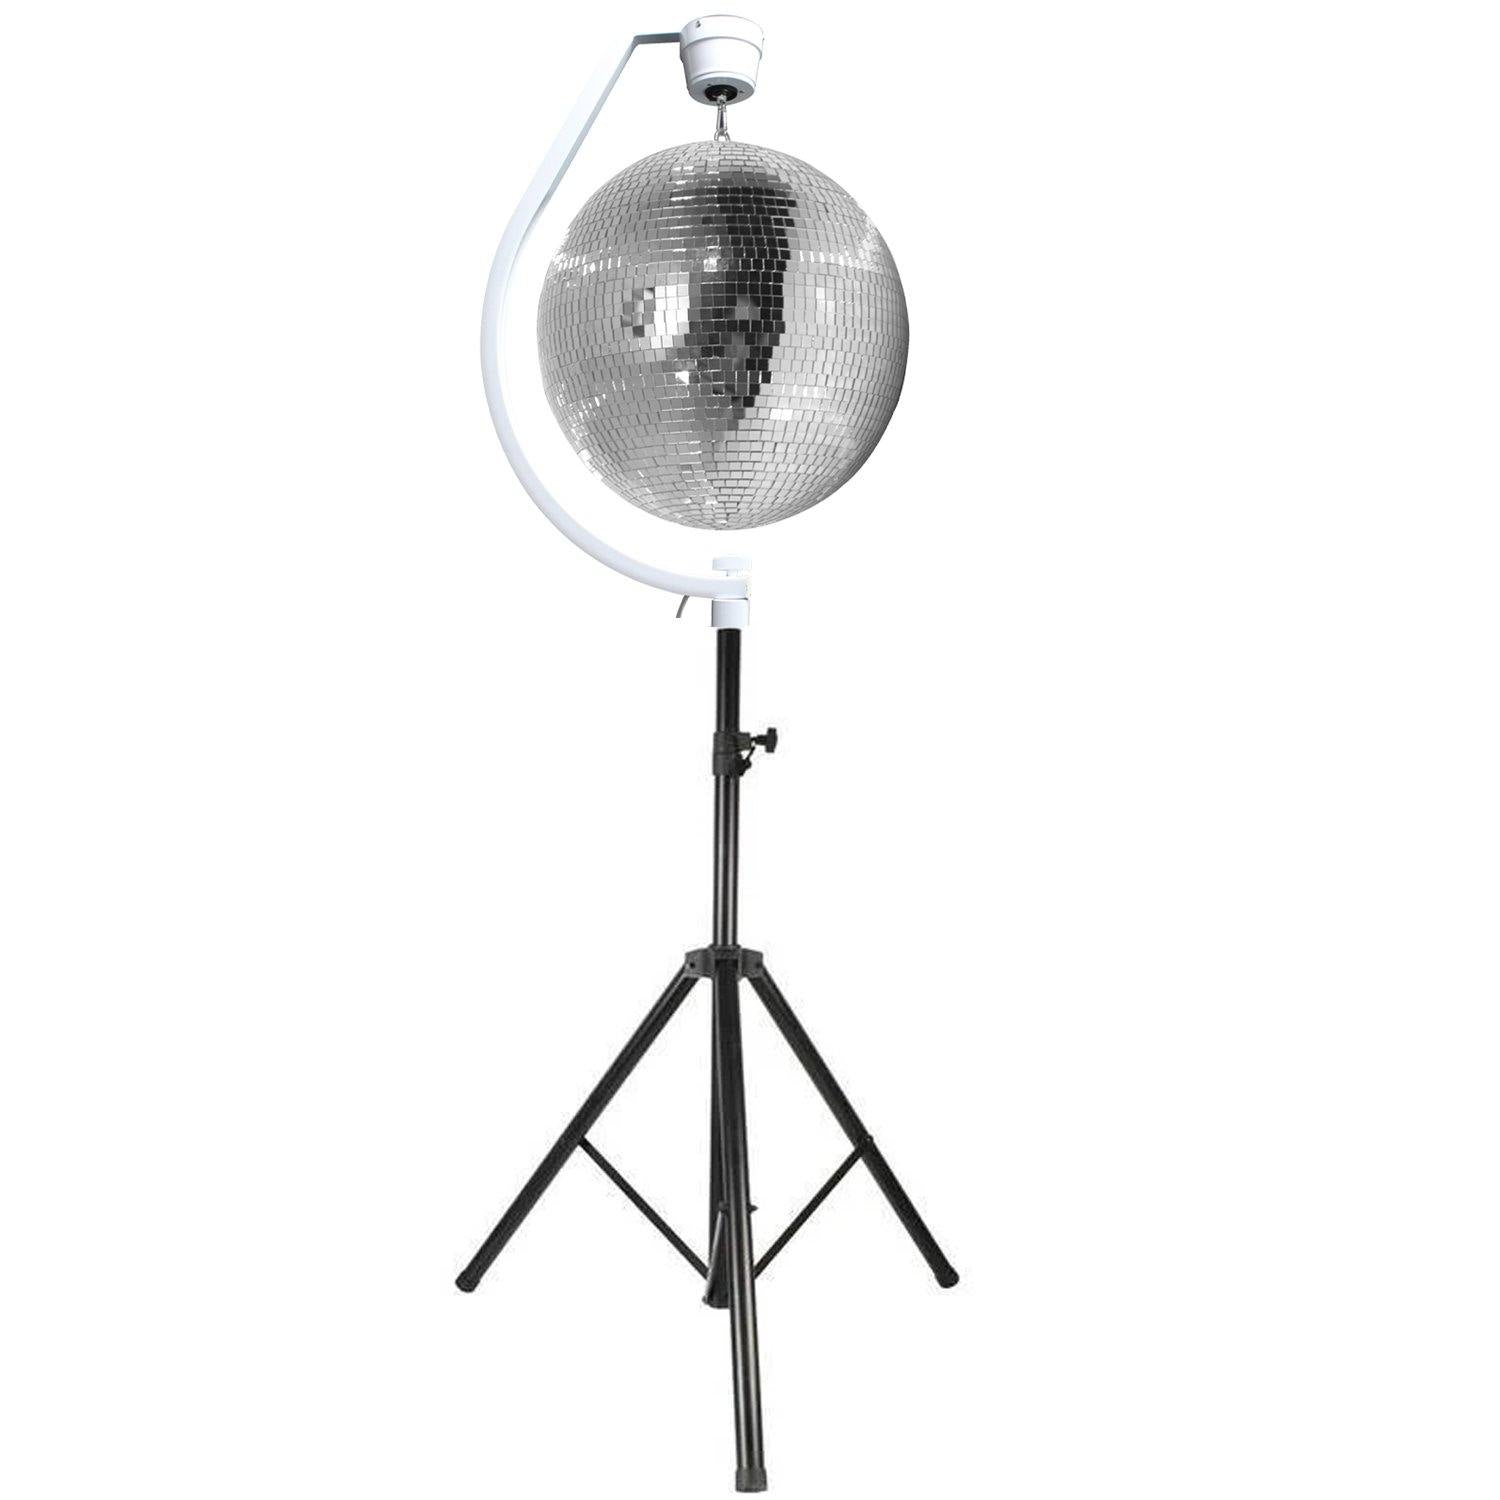 Equinox Curve Mirror Ball Hanging Bracket 30-50cm with Stand - DY Pro Audio